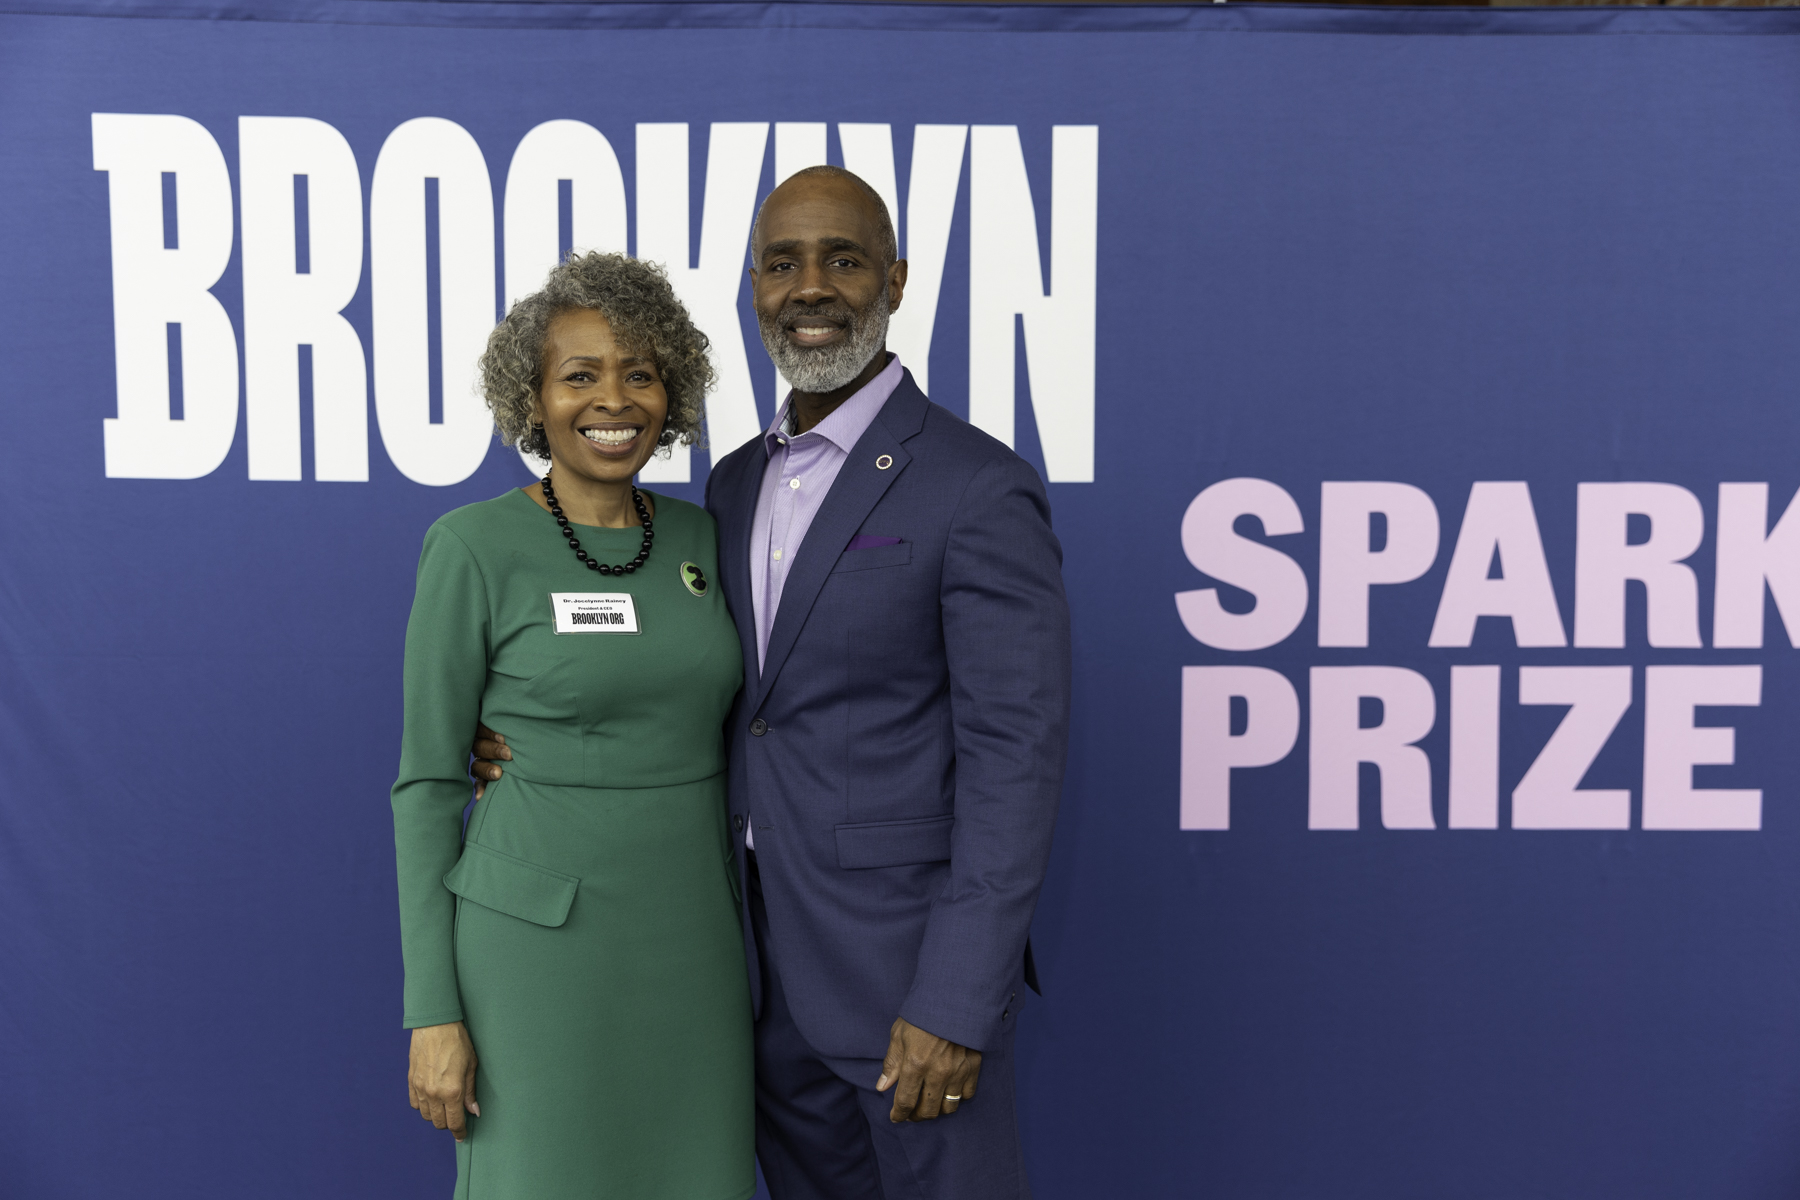 Two individuals smiling for a photo in front of a banner that reads "brooklyn spark prize.